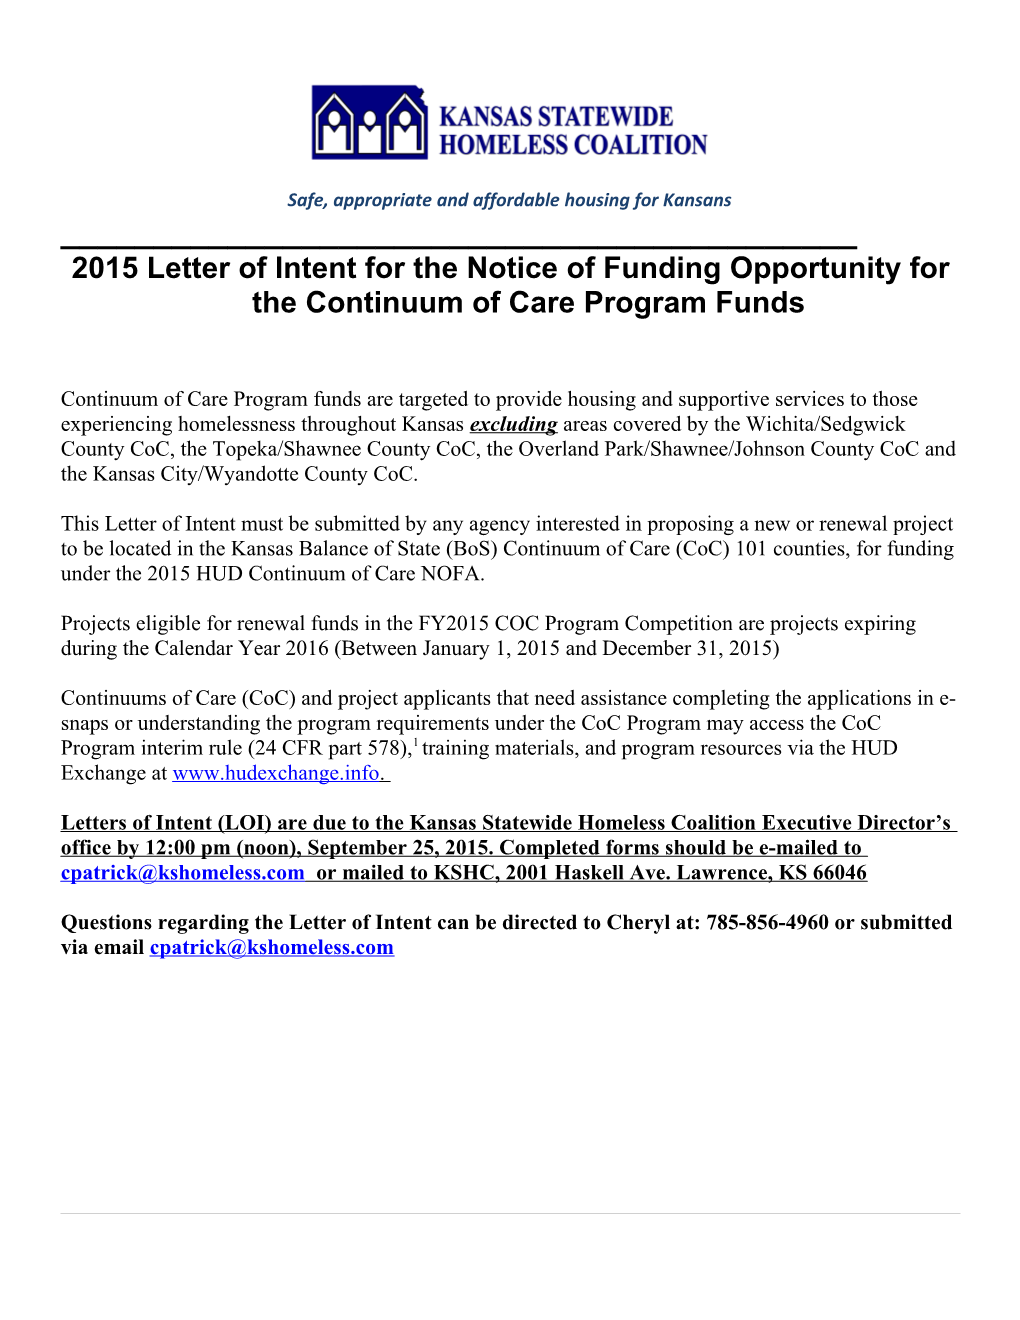 2015 Letter of Intent for the Notice of Funding Opportunity for the Continuum of Care Program